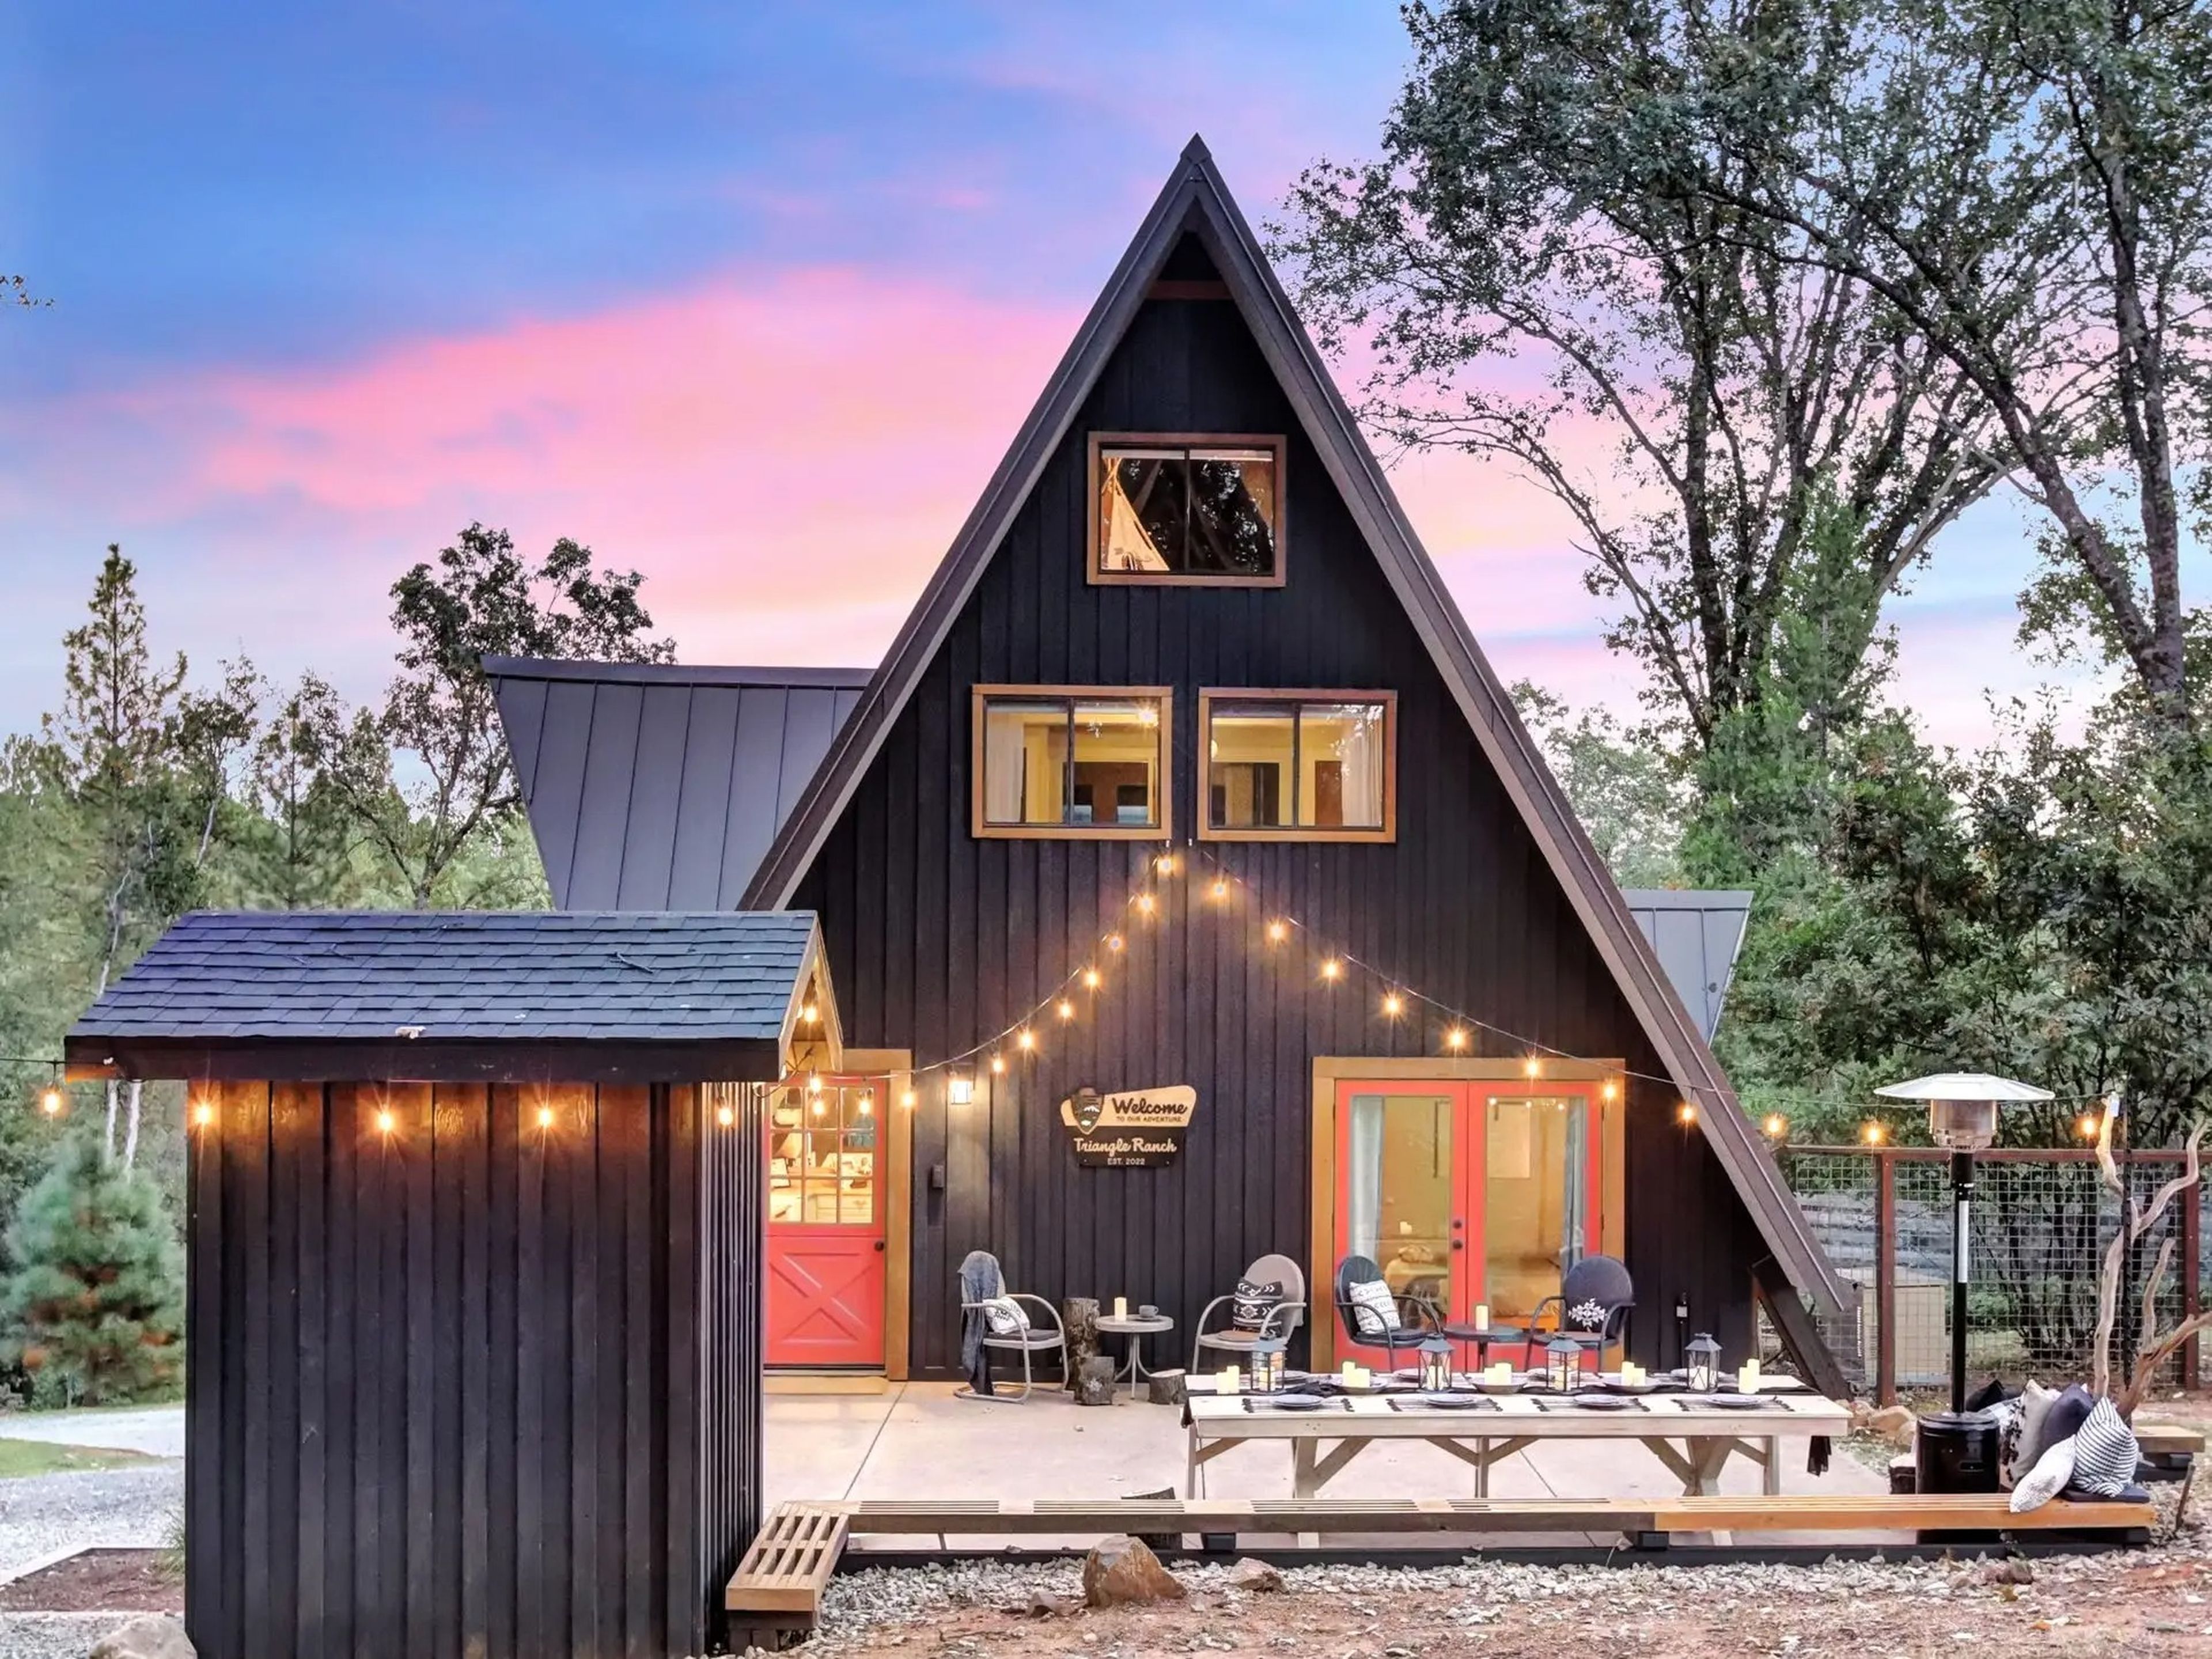 Exterior shot of A-frame Airbnb cabin Grass Valley, California